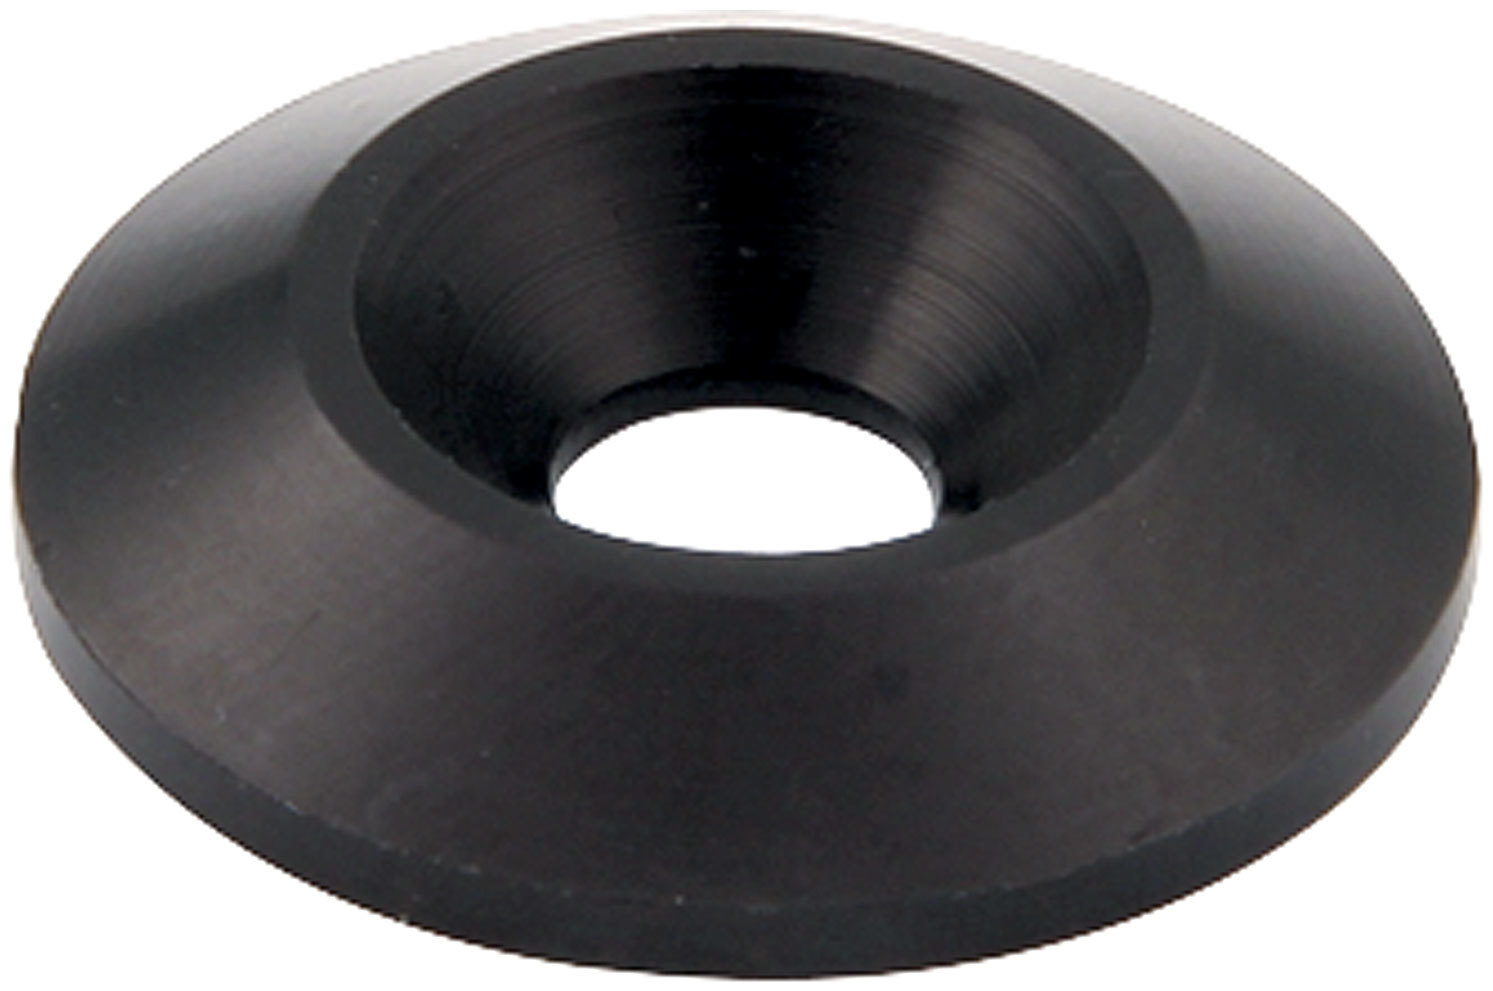 Allstar Performance 18665-50 - Countersunk Washer Blk 1/4in x 1-1/4in 50pk